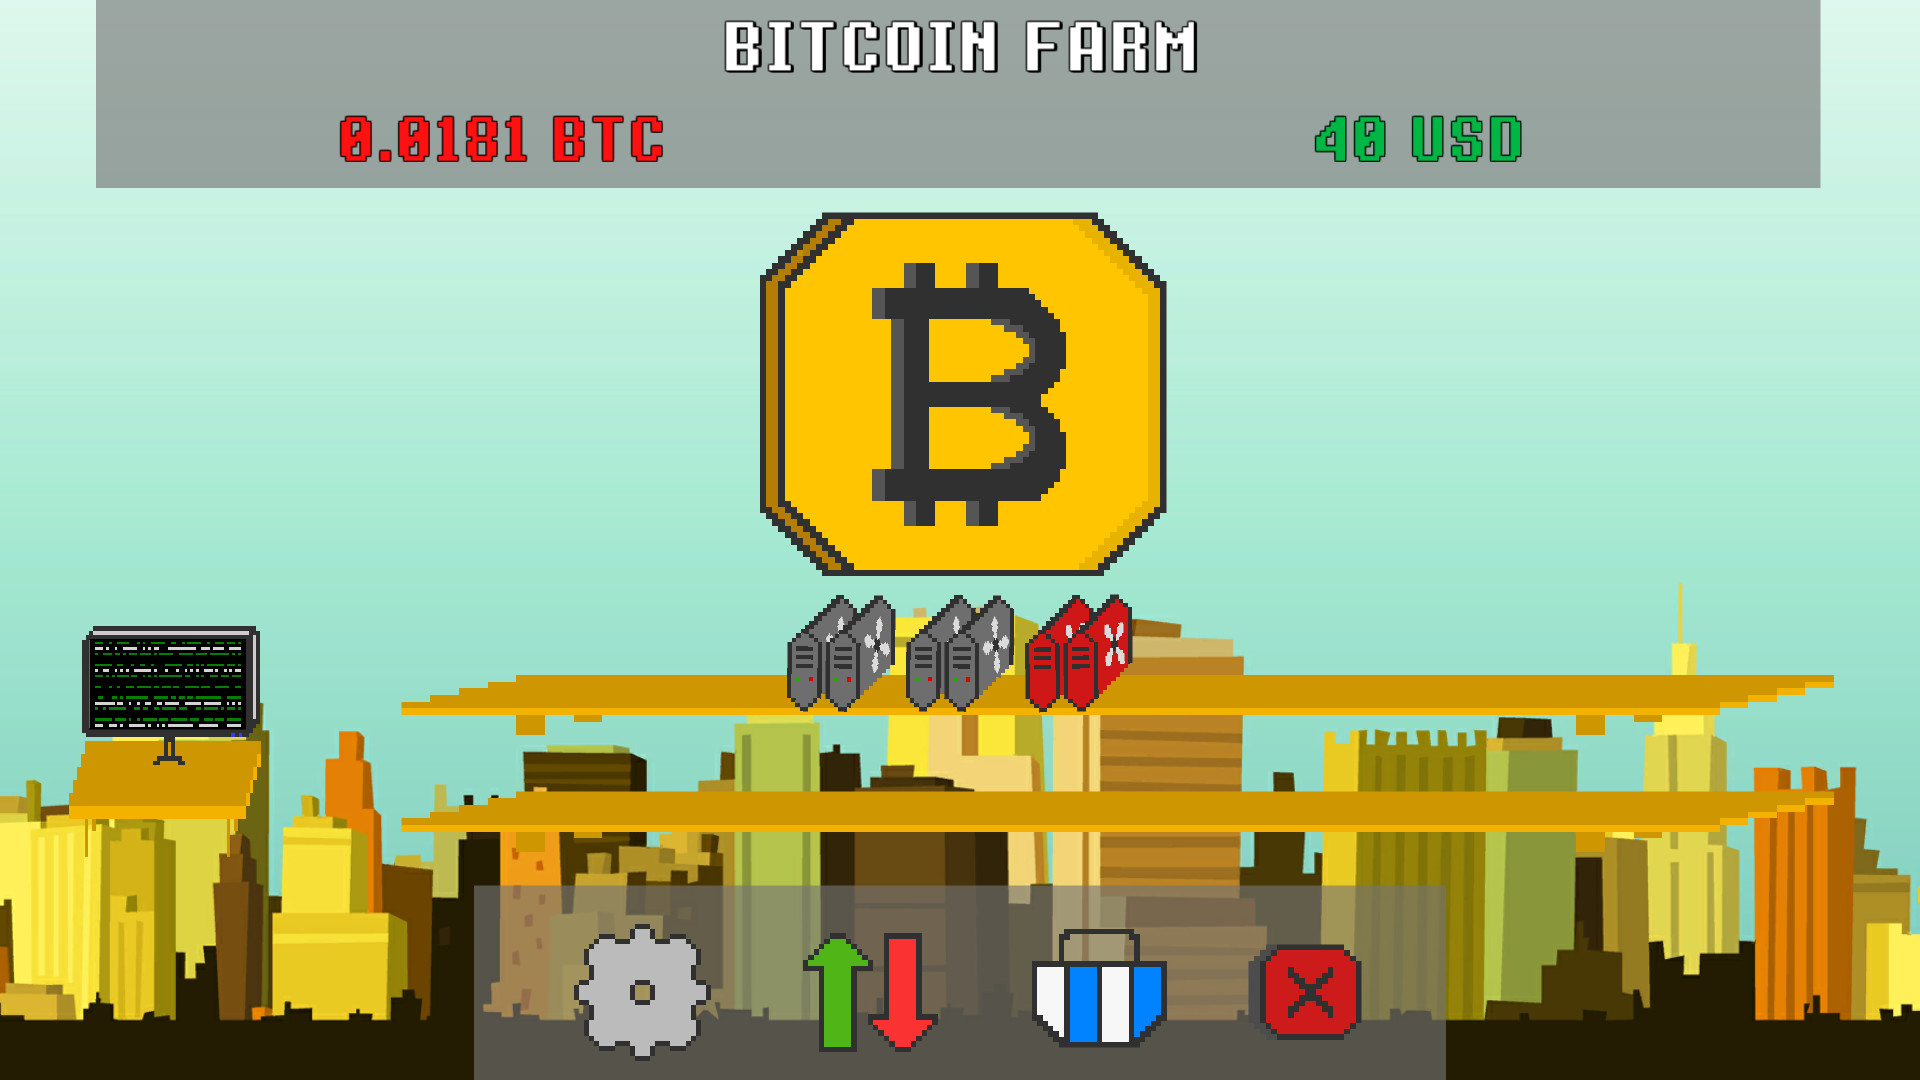 buy video games with bitcoins for sale